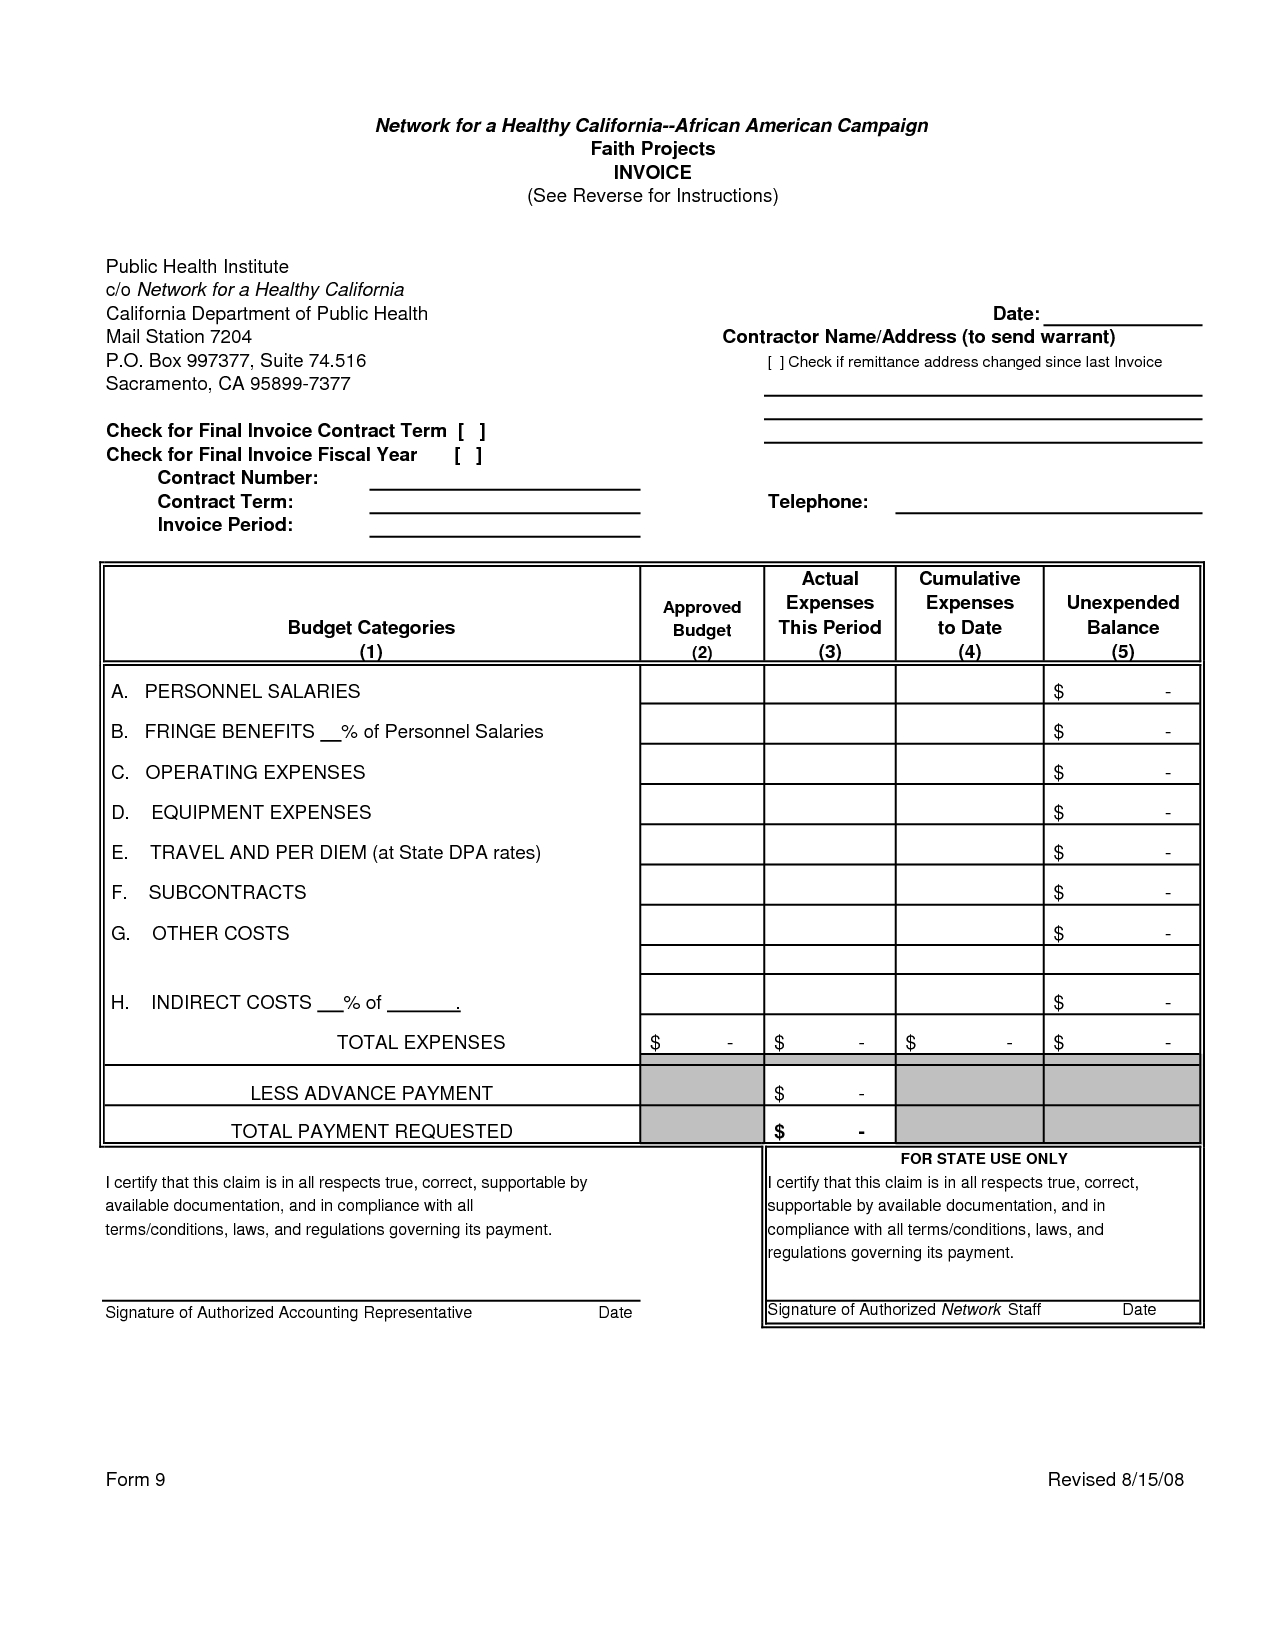 invoice terms and conditions invoice terms and conditions template 1275 X 1650